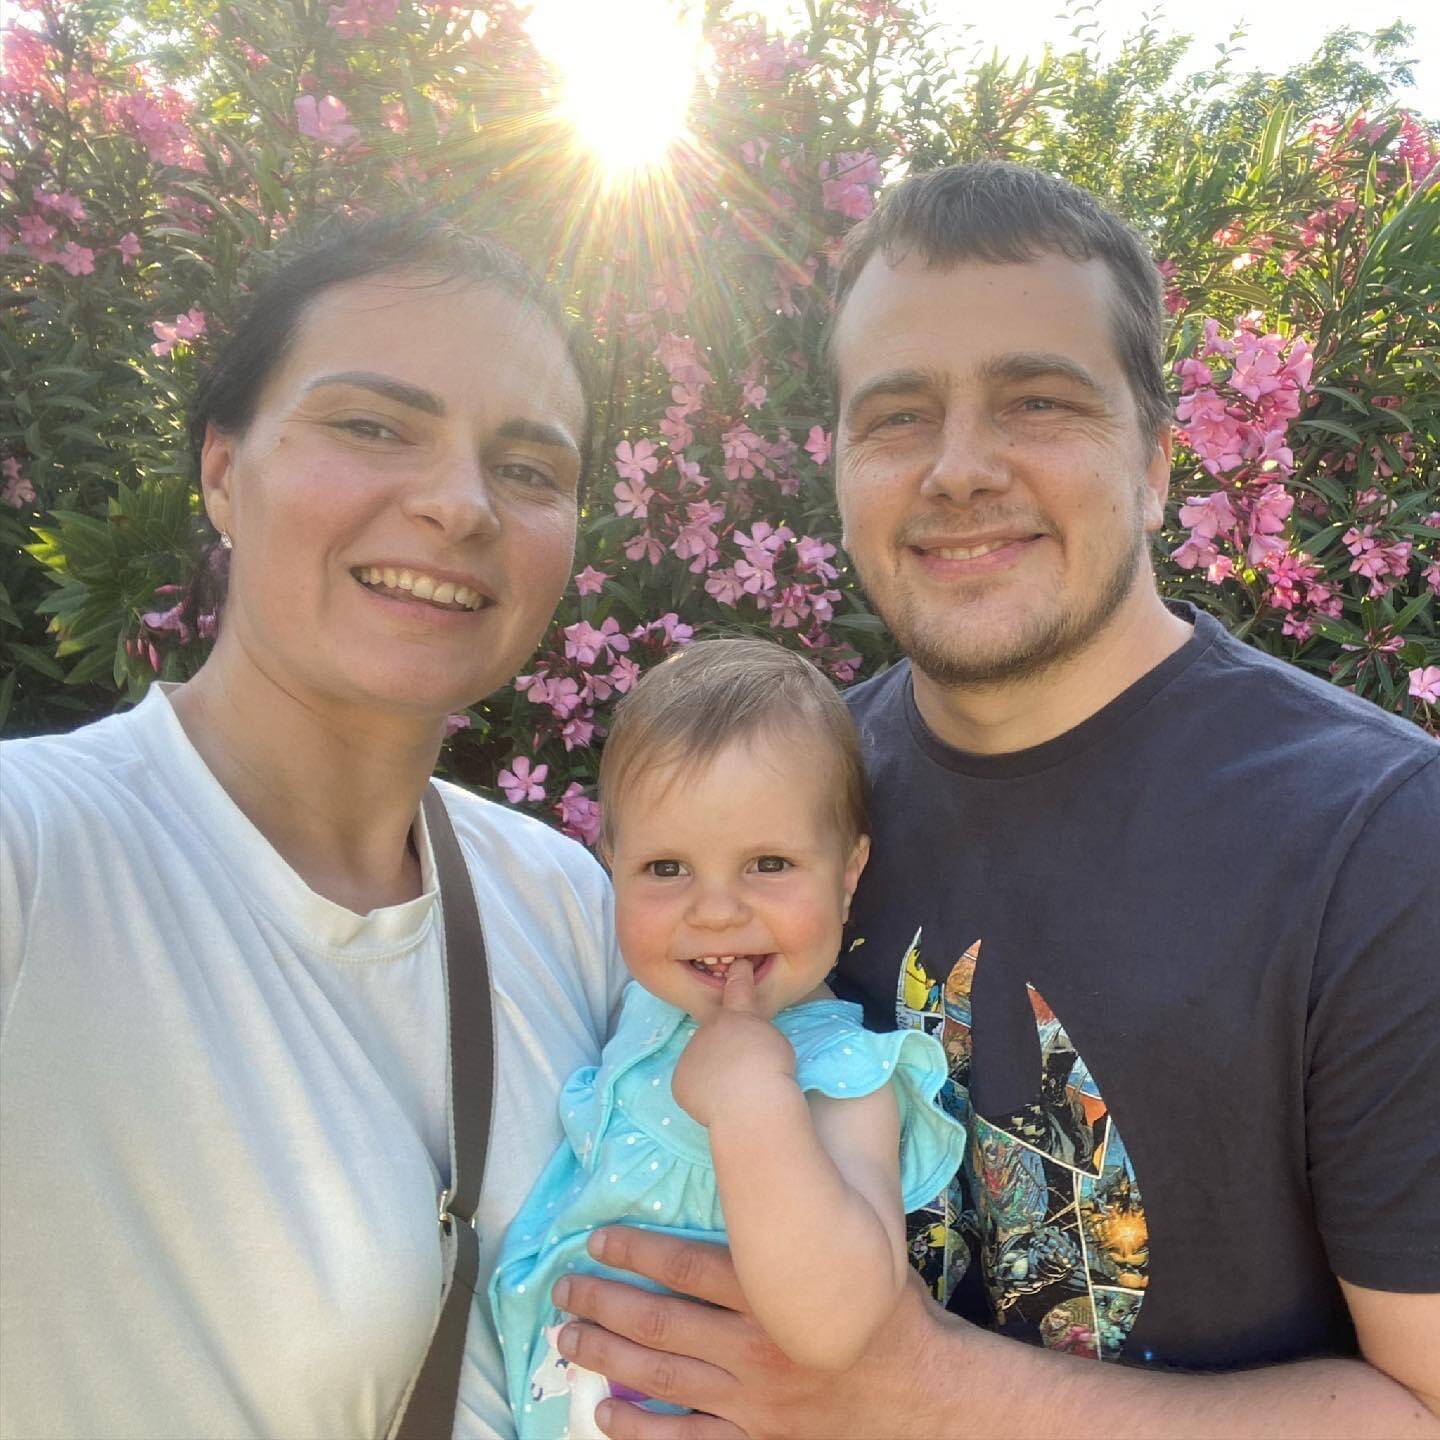 Valeriia Horodnycha and Sergey Polyakov hold their two-year-old daughter as they take a picture. Courtesy of Valeriia Horodnycha.